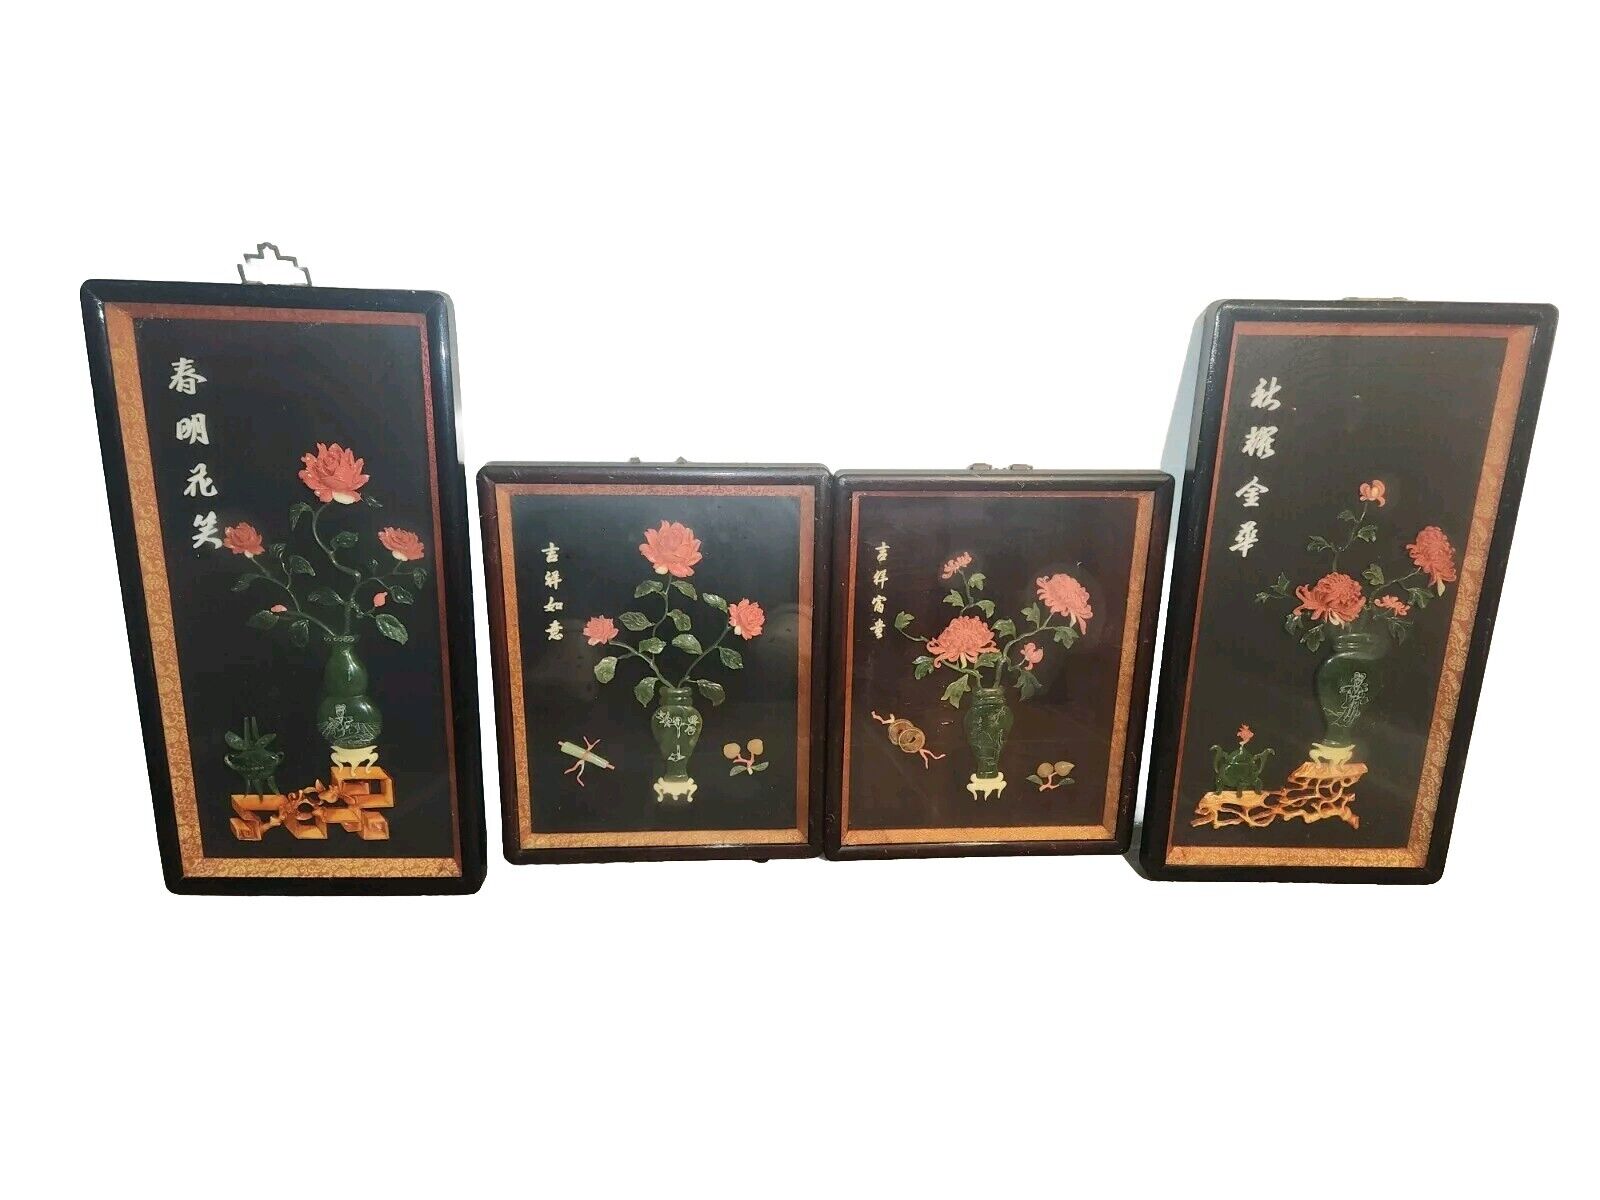 Set of 4 Vintage Asian Shadow Box Pictures with Faux Jade and Coral Flowers